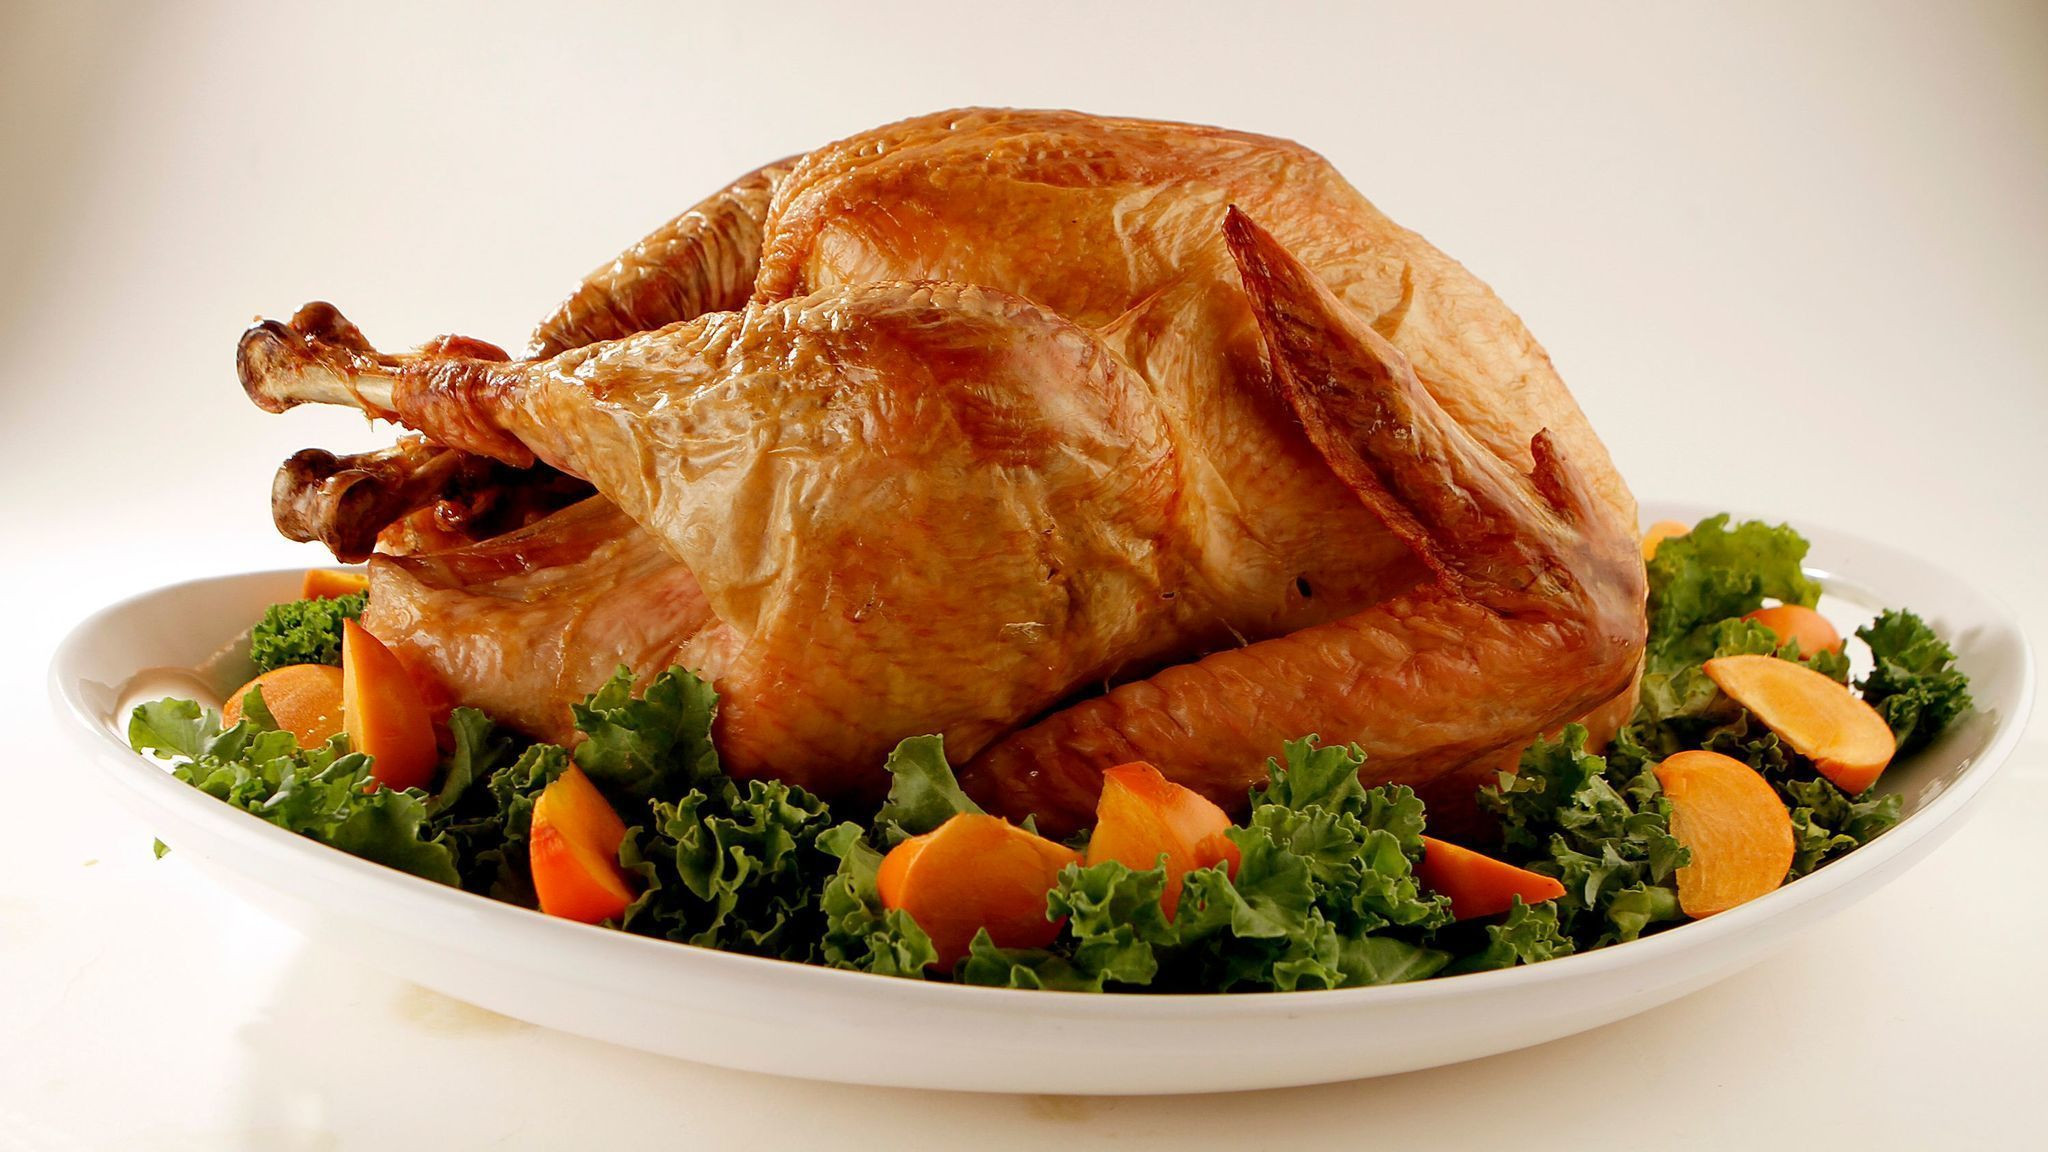 Thanksgiving Turkey Pics
 A beginner s guide to cooking a Thanksgiving turkey LA Times